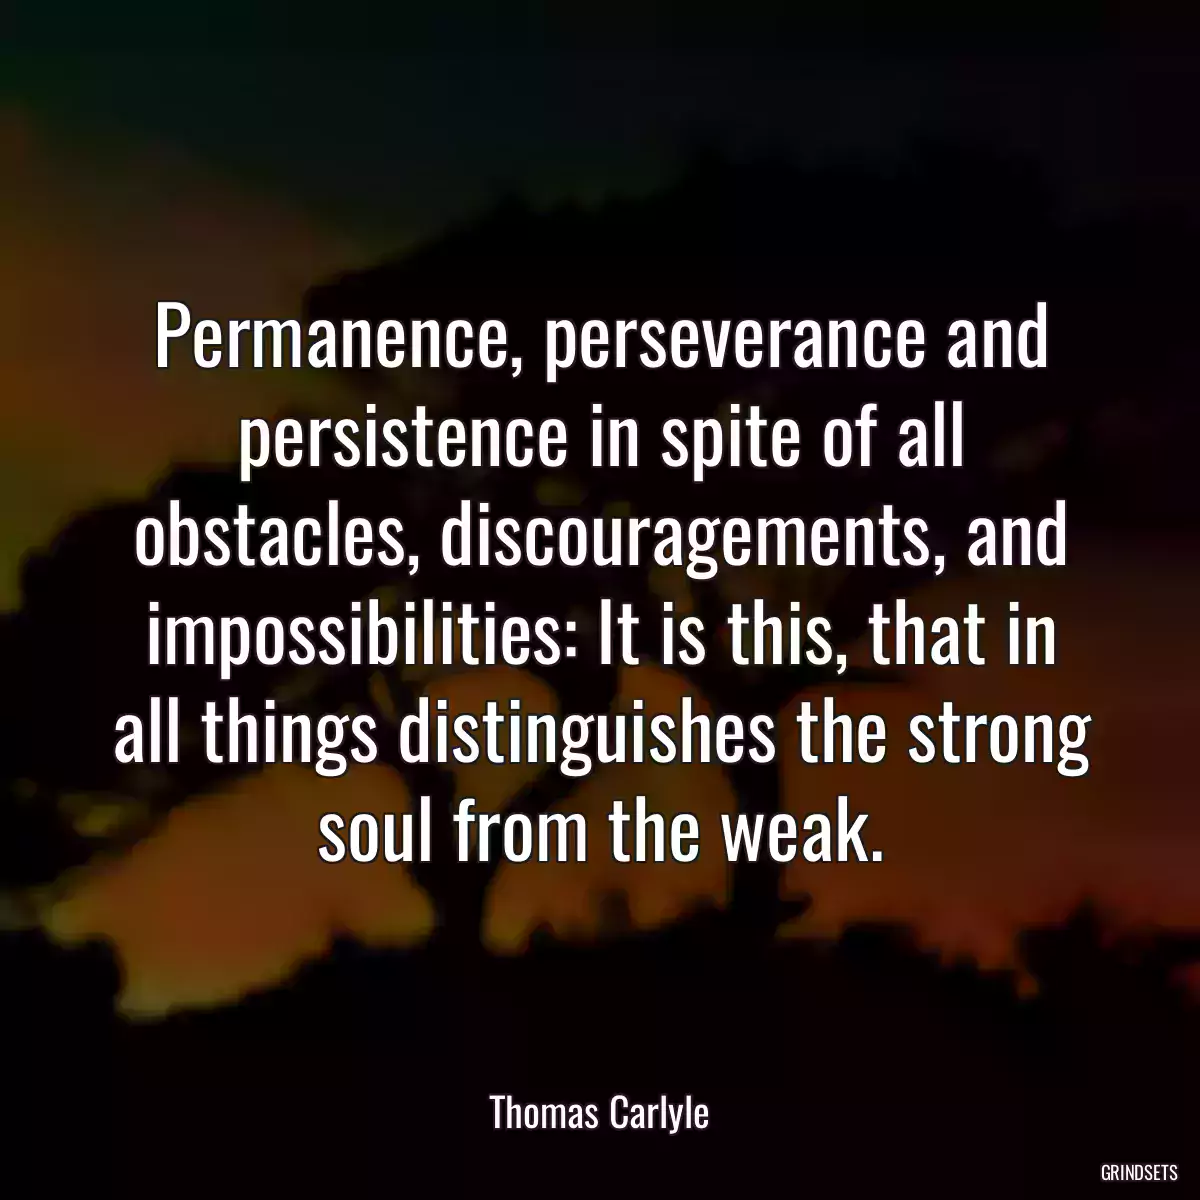 Permanence, perseverance and persistence in spite of all obstacles, discouragements, and impossibilities: It is this, that in all things distinguishes the strong soul from the weak.